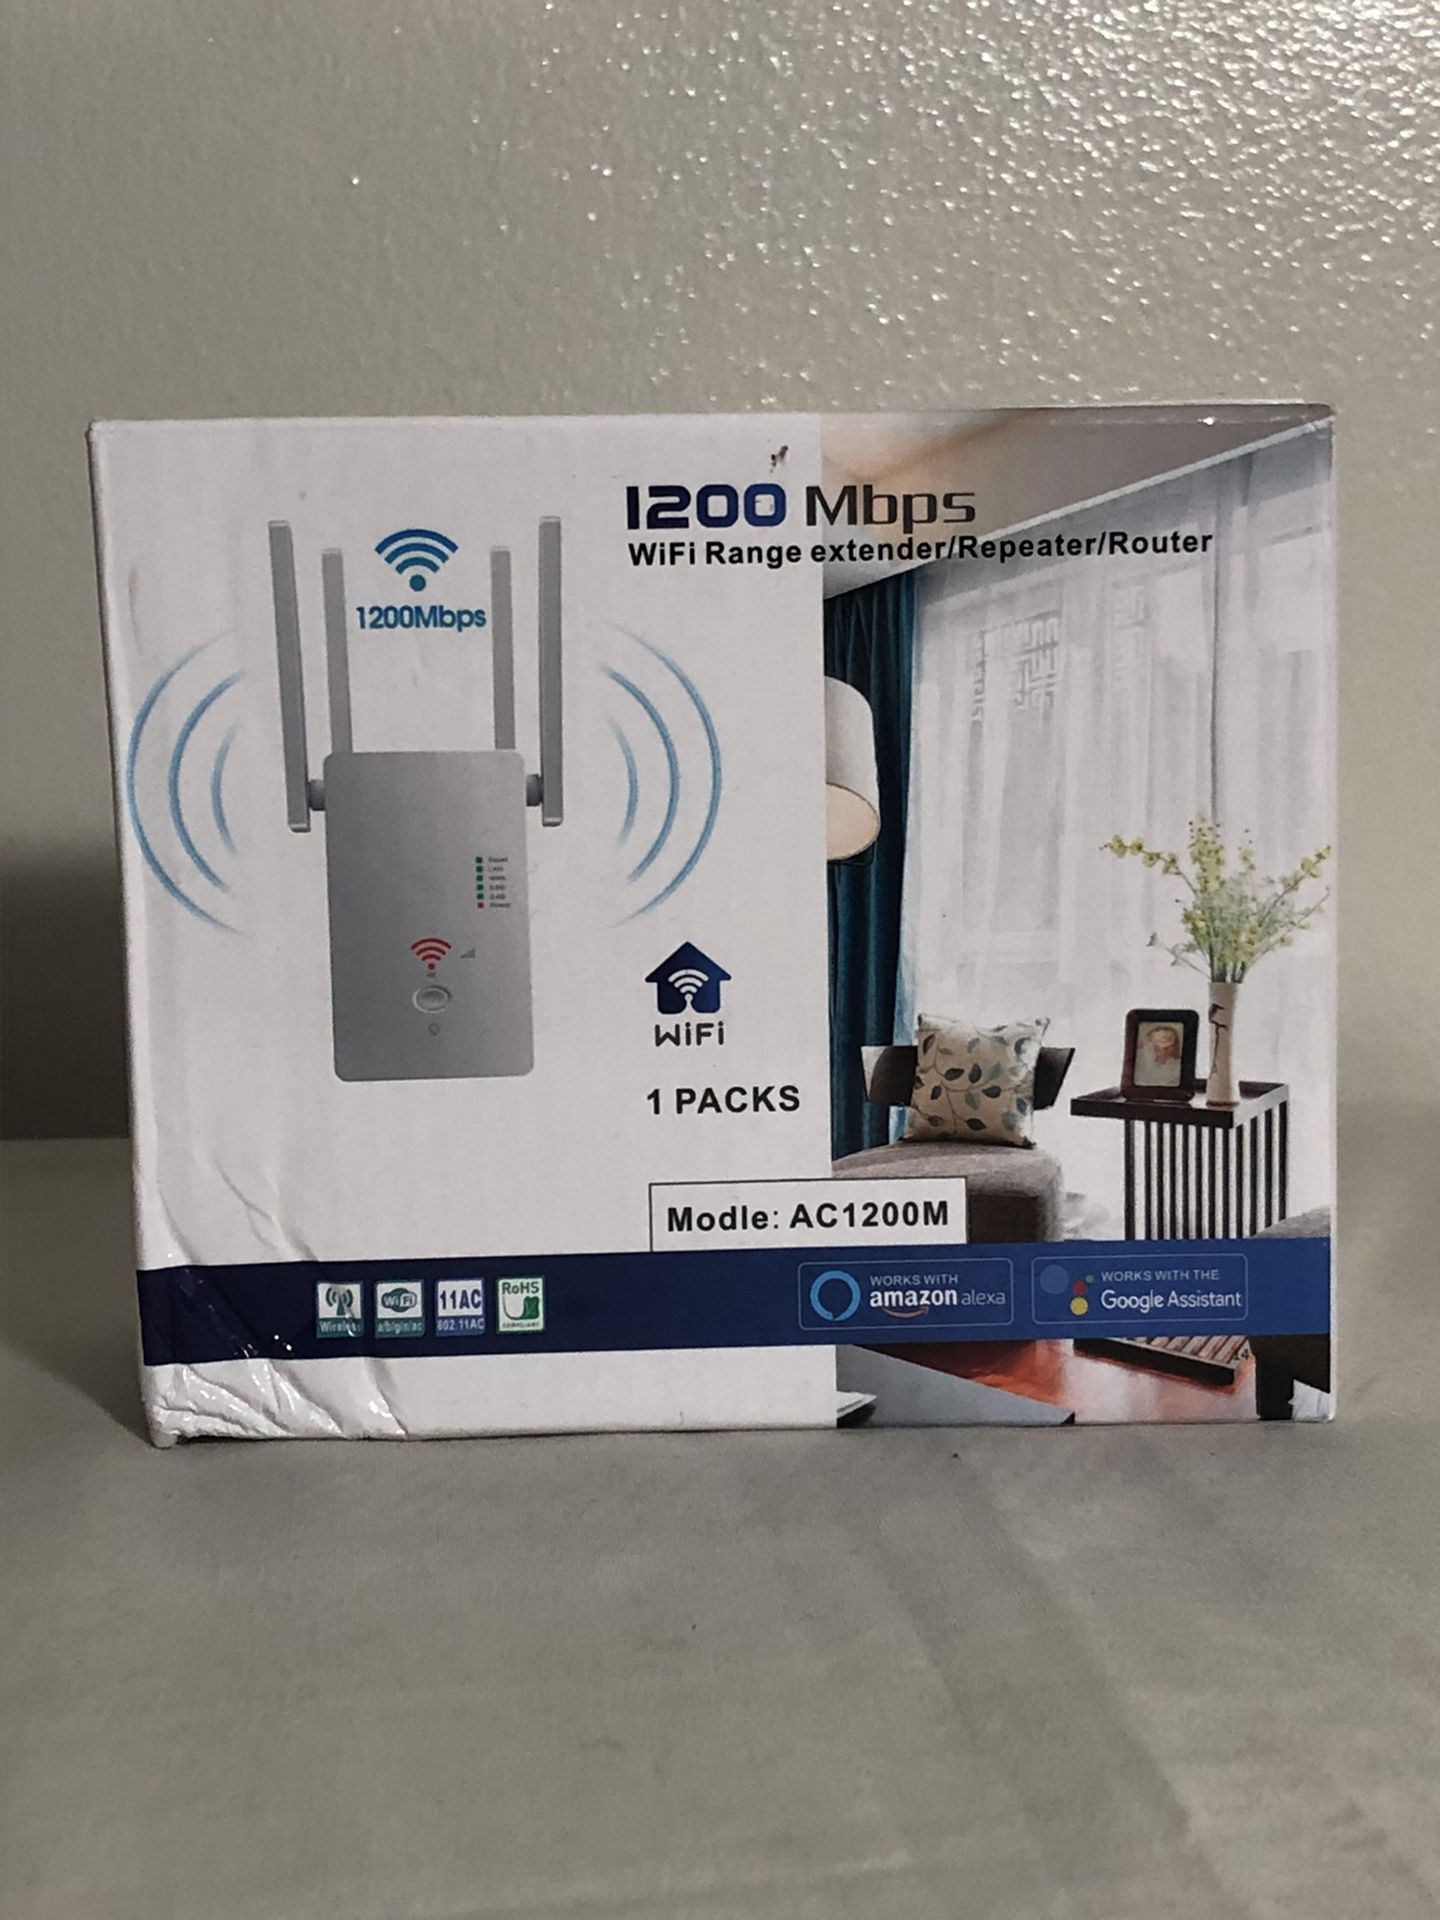 WiFi Range Extender/ Repeater/Repeater/Router.